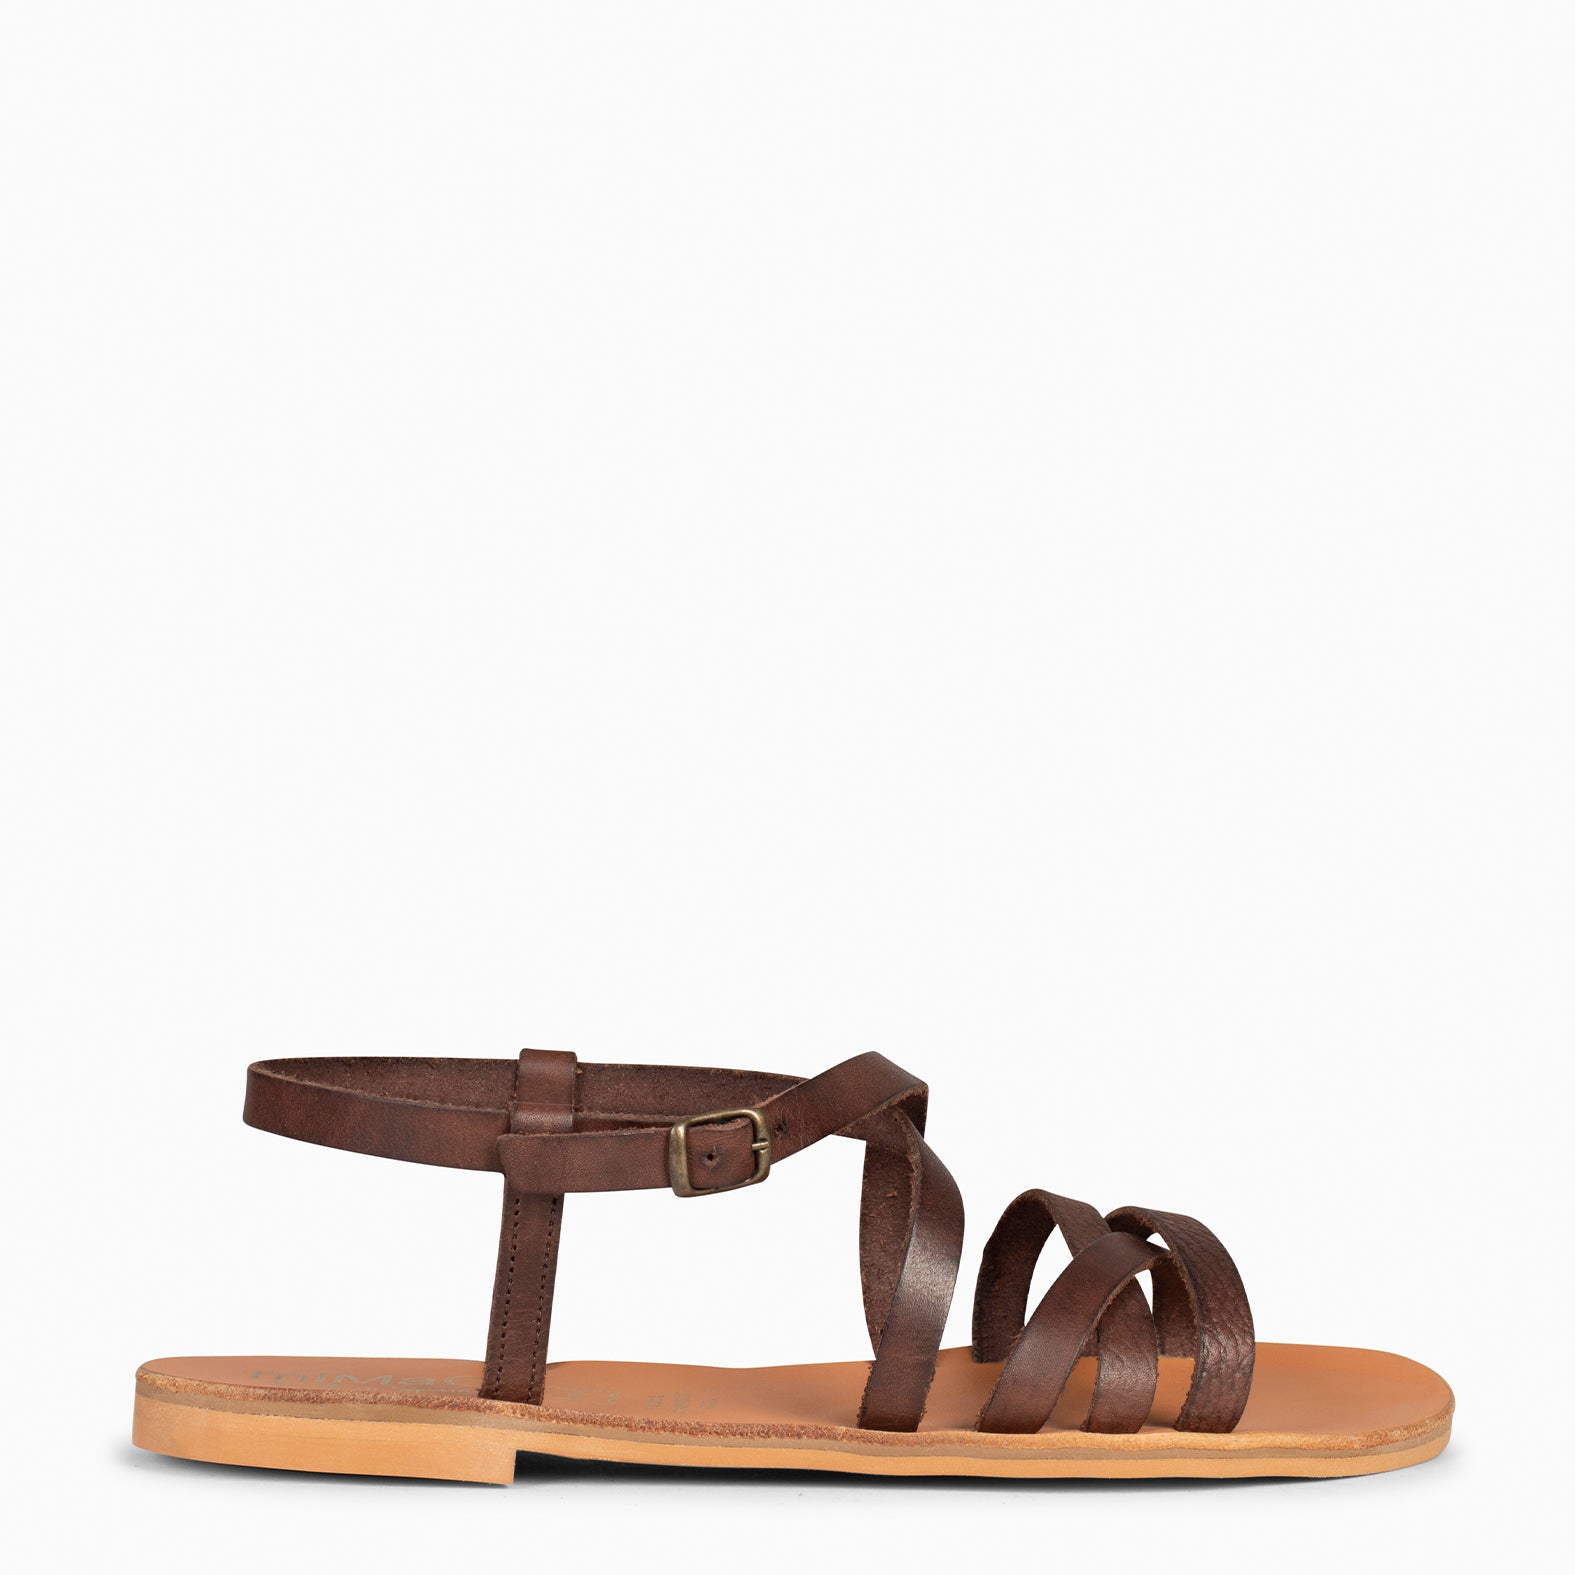 IXORA – BROWN flat sandals with buckle